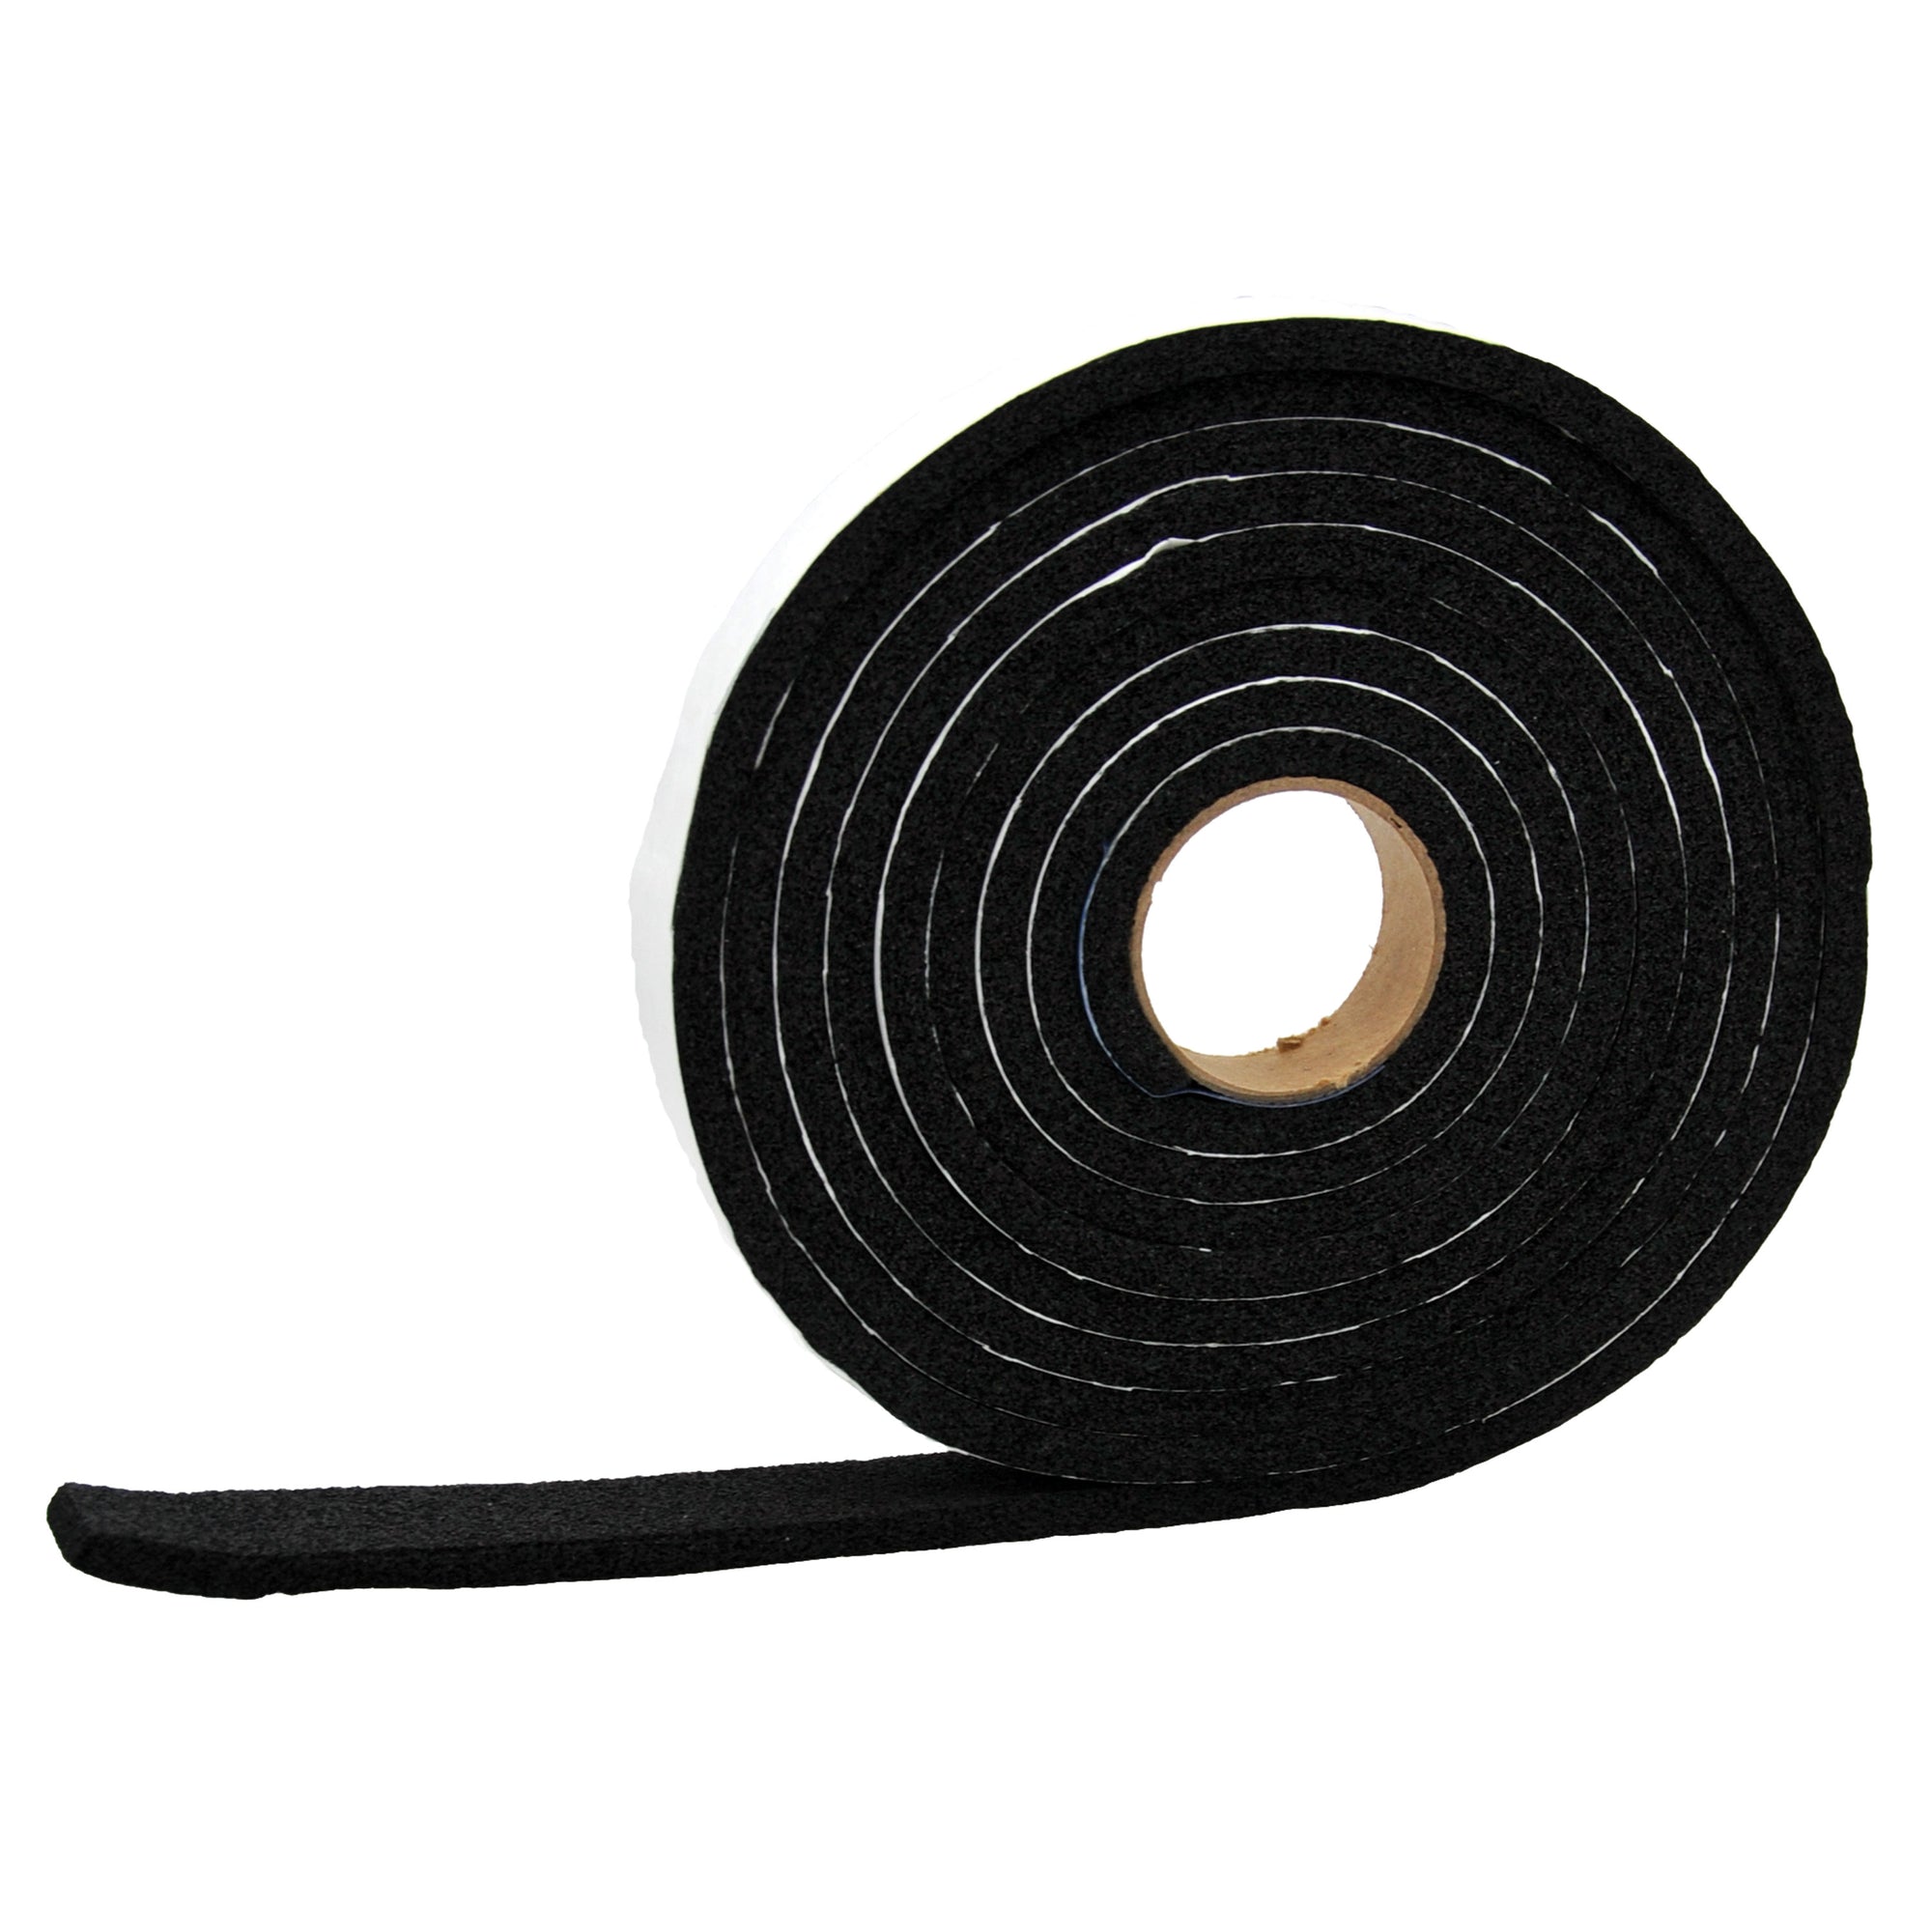 AP Products 018-143817 Weather Stripping - 1/4" x 3/8" x 50'